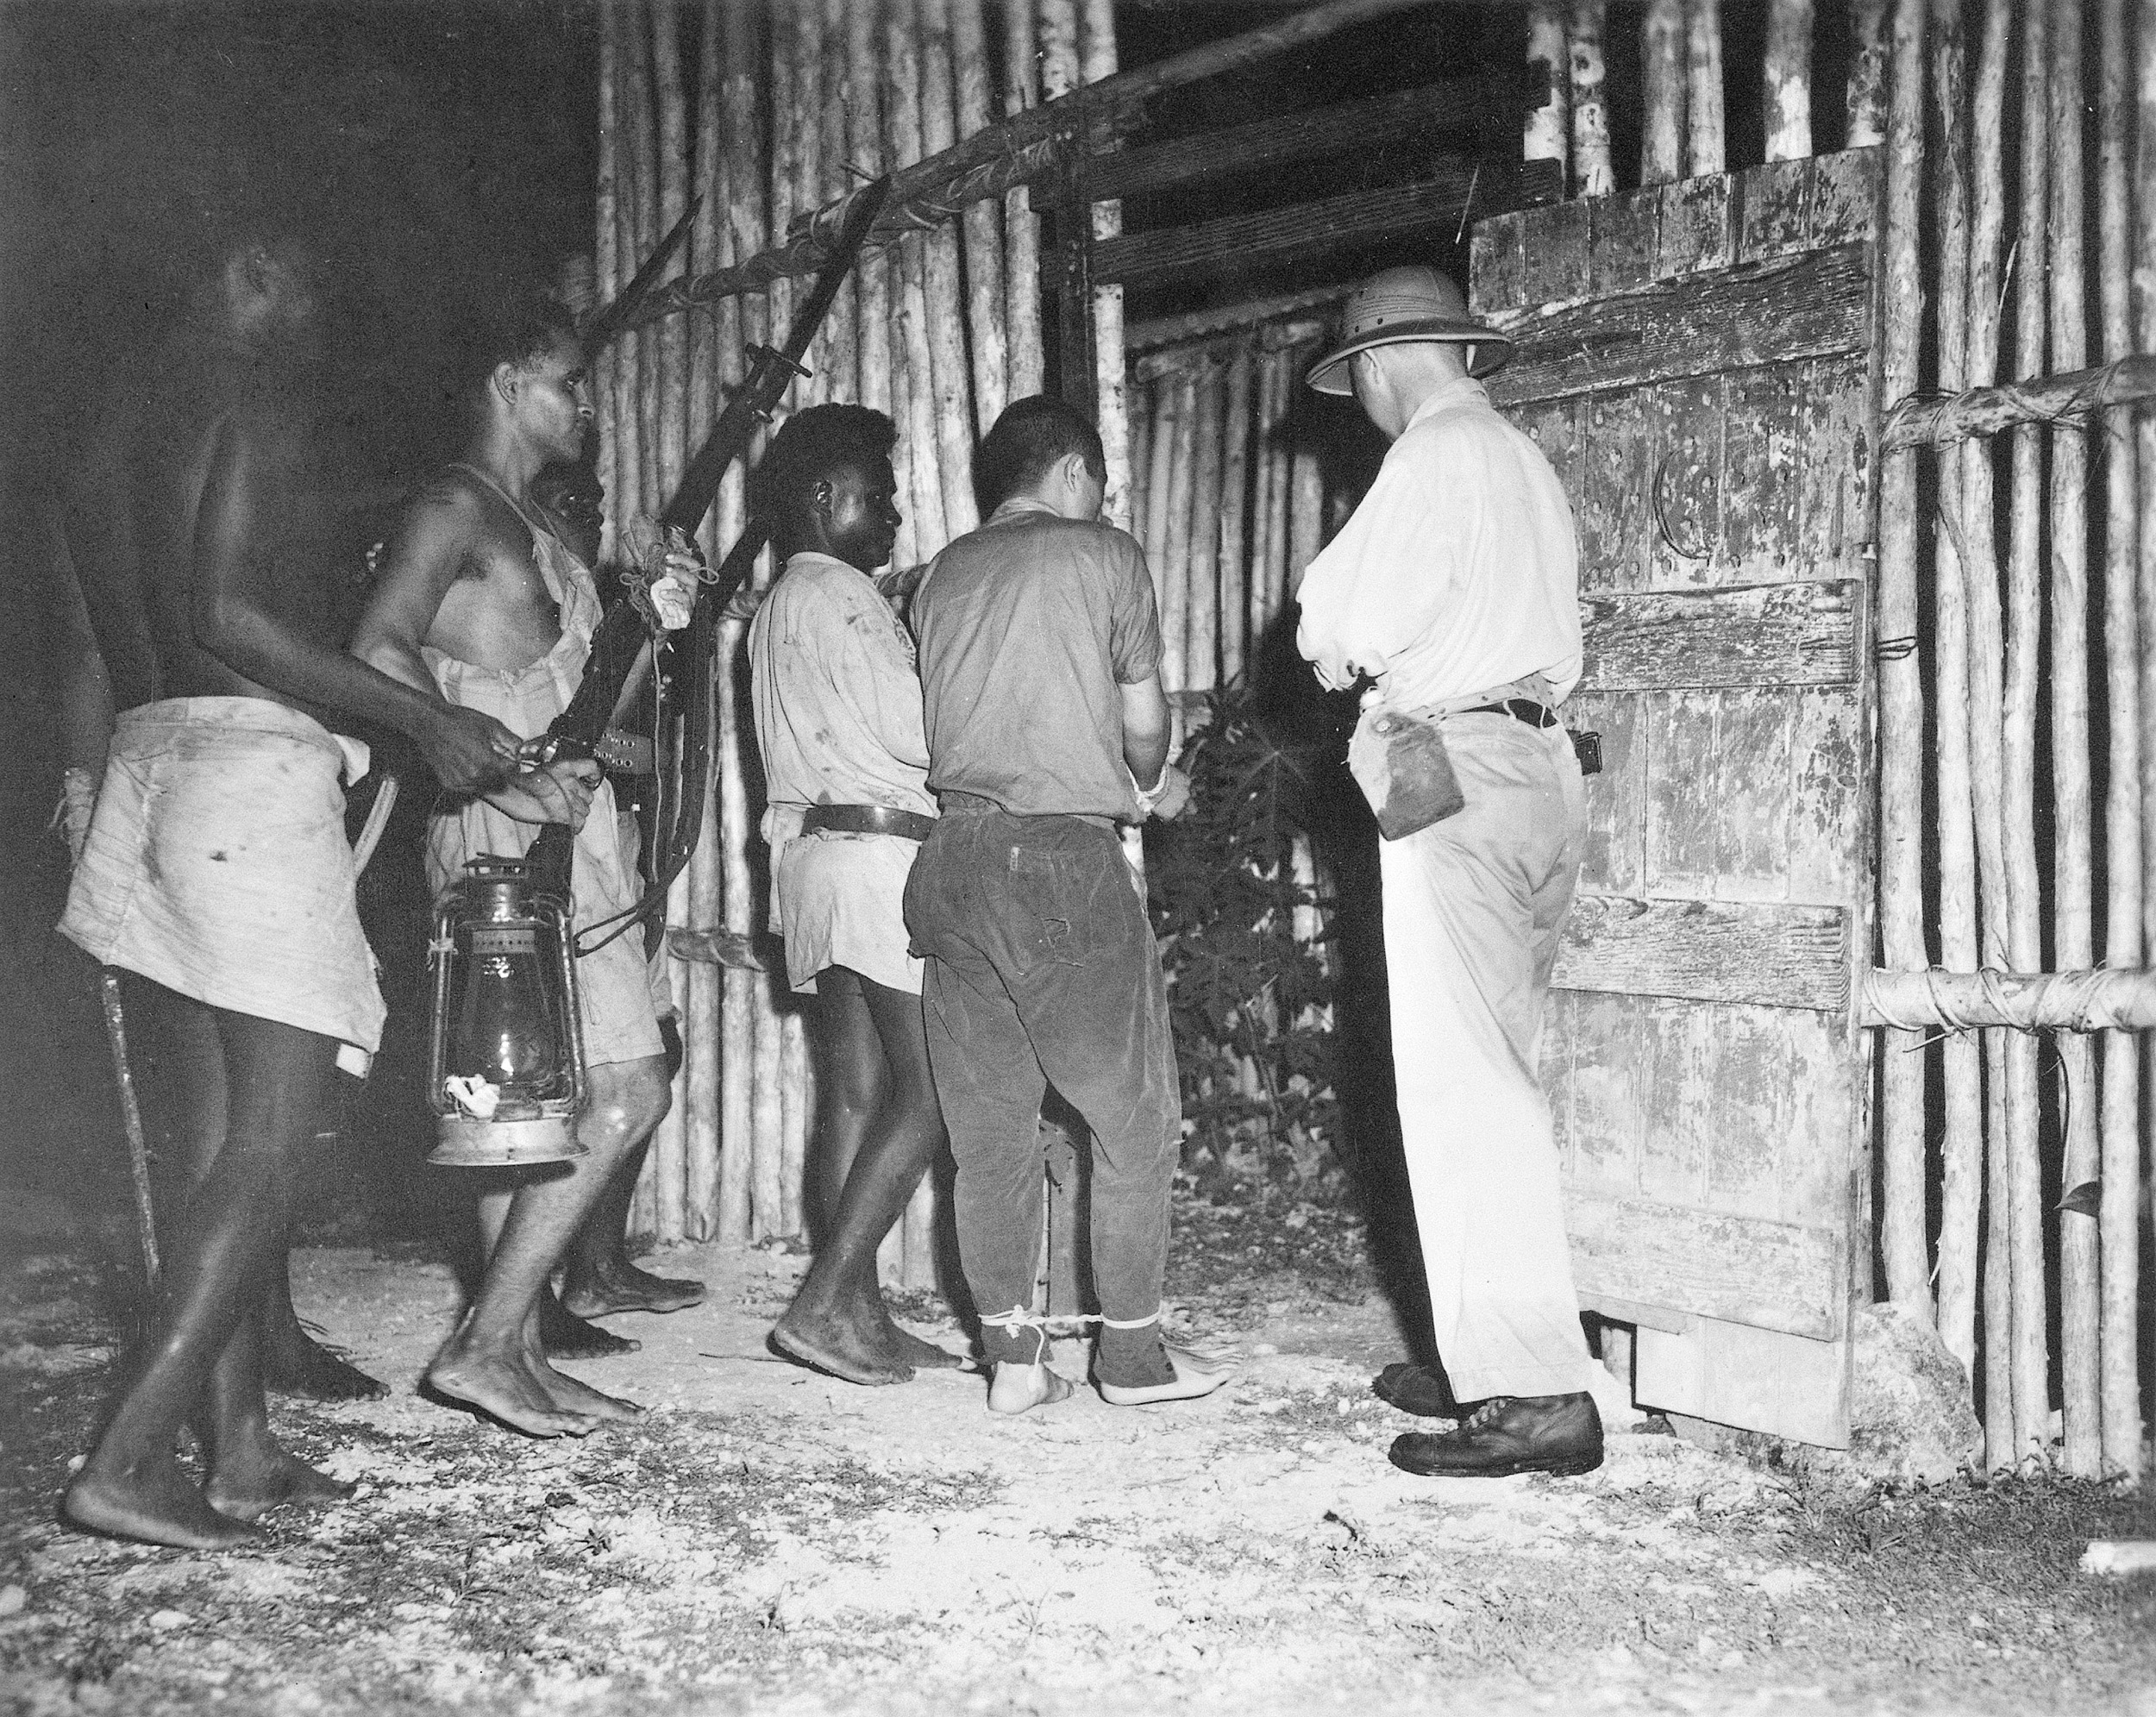 An armed guard of native scouts trained and commanded by Captain D.G. Kennedy escorts a captured Japanese pilot into captivity at the Segi coast watchers’ station on New Georgia in March 1943.